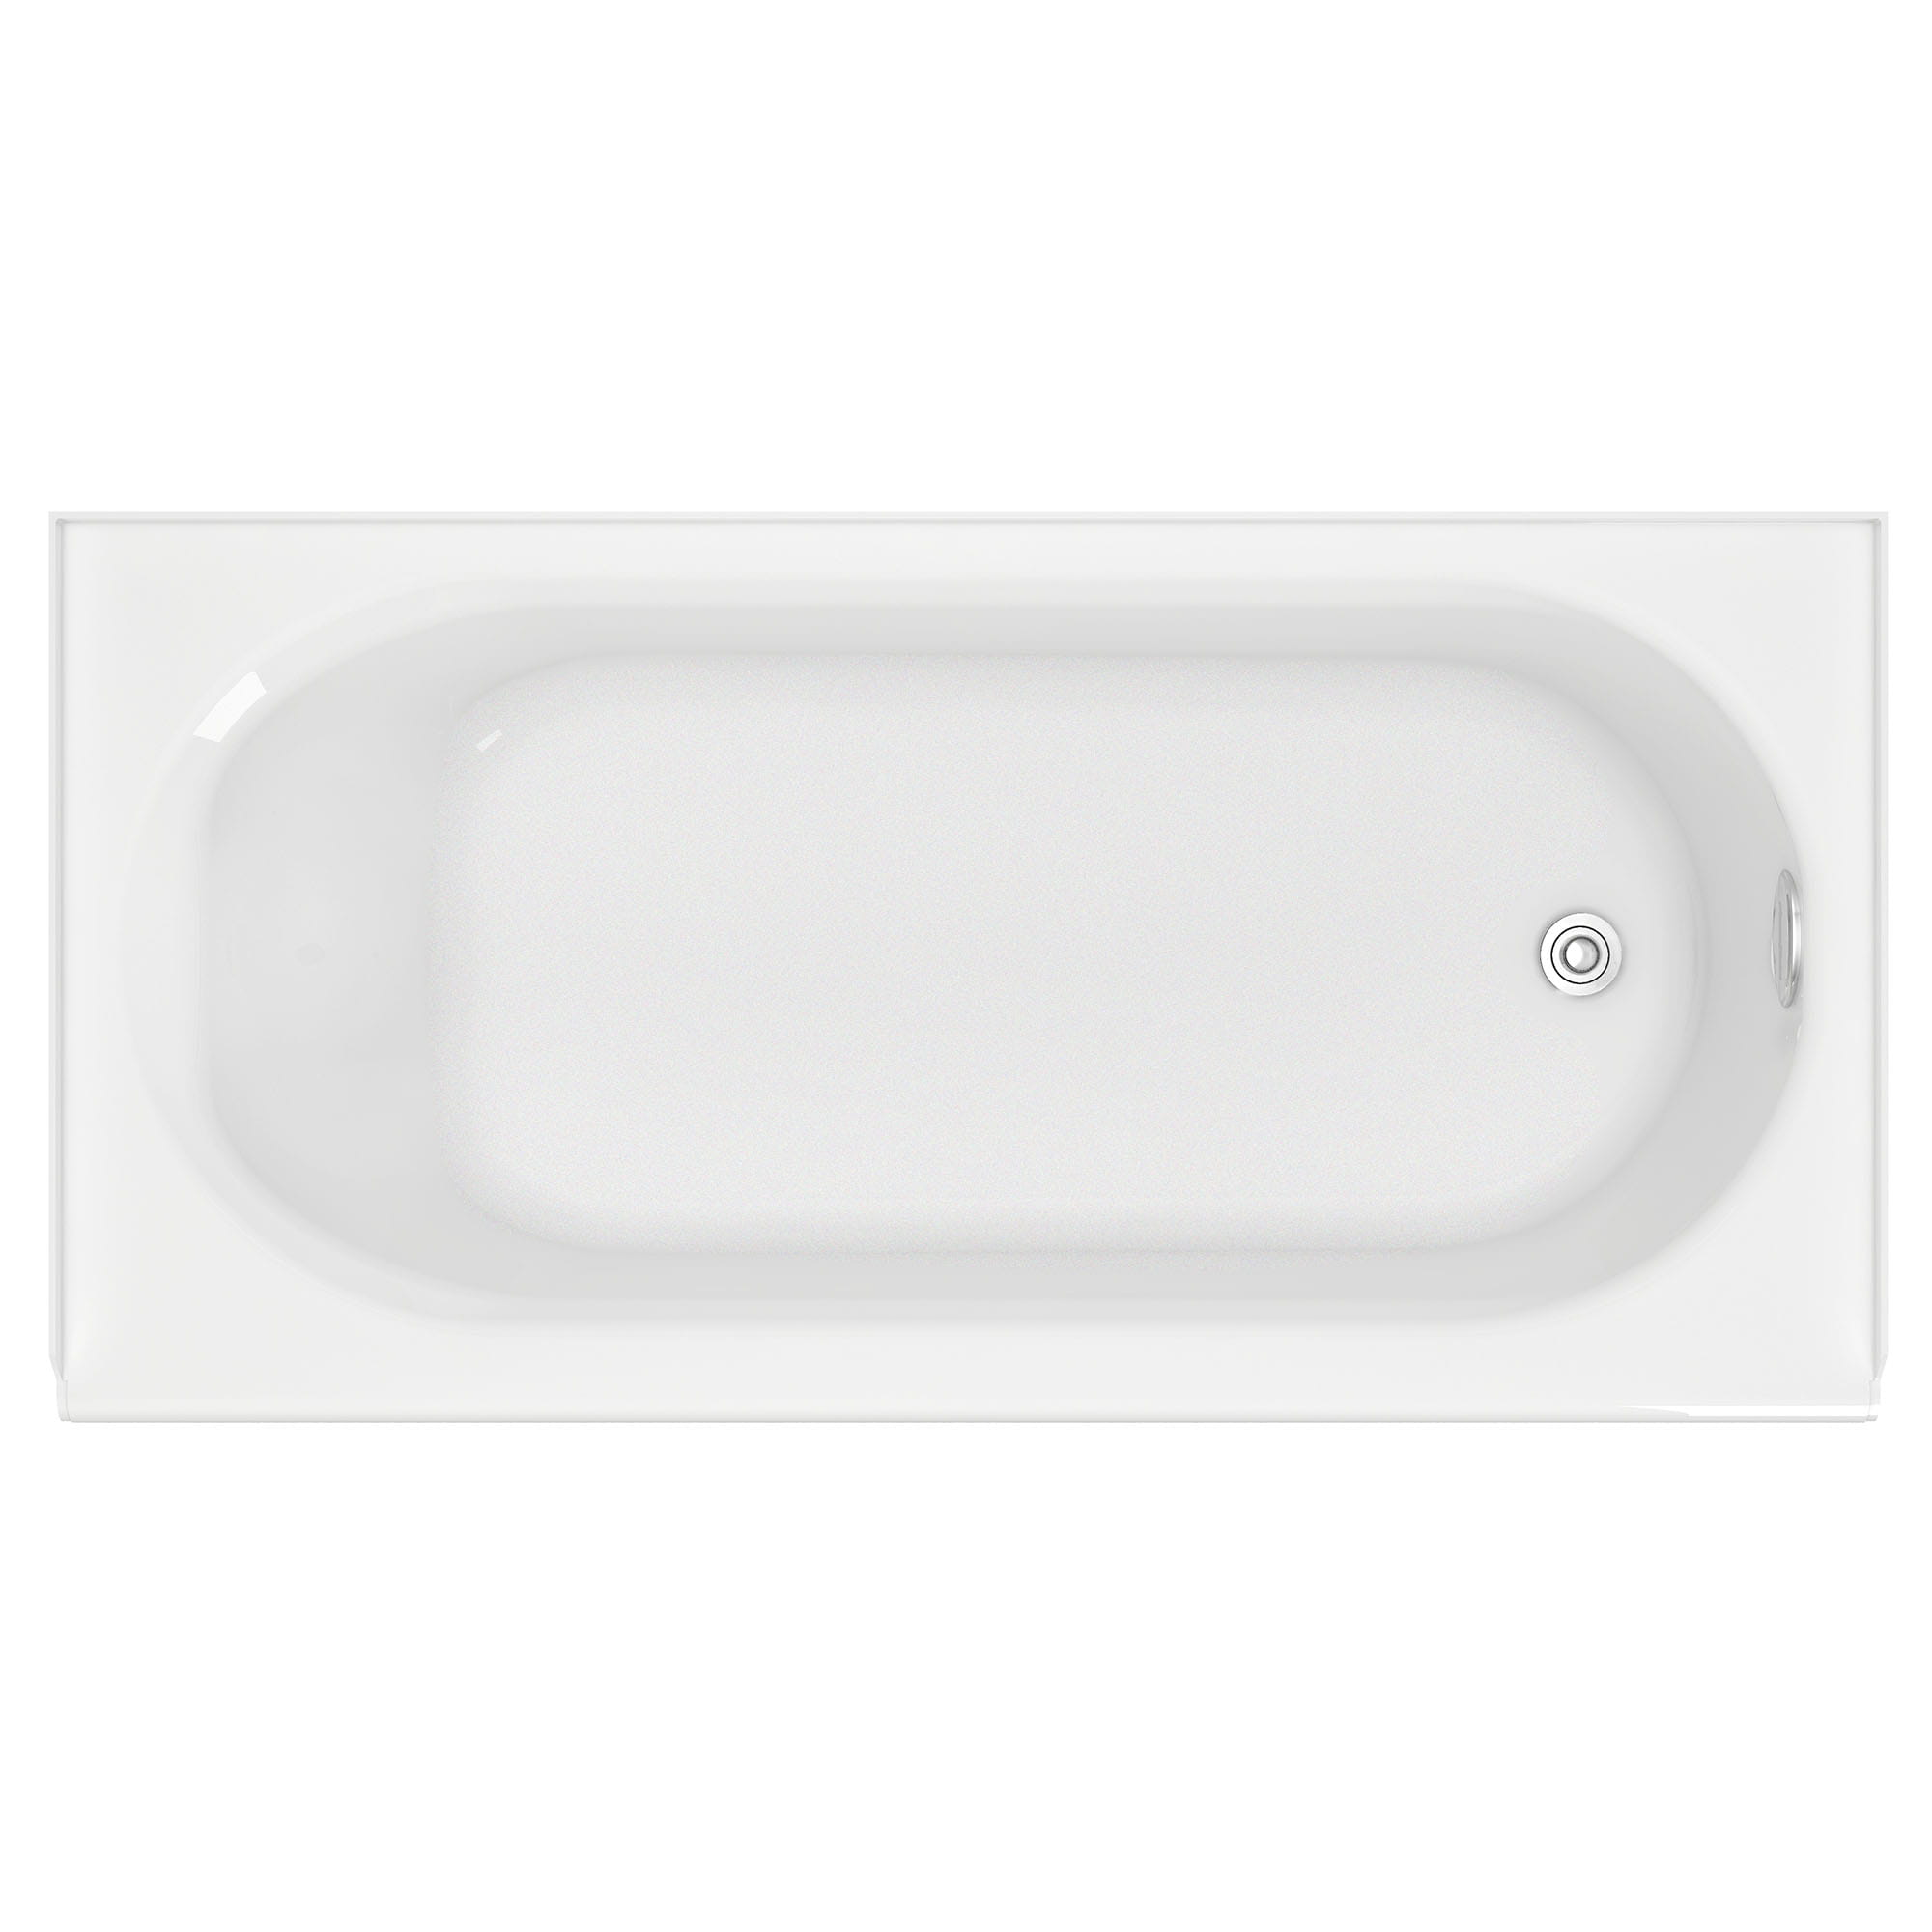 Princeton Americast 60 x 30 Inch Integral Apron Bathtub Right Hand Outlet With Integral Drain WHITE